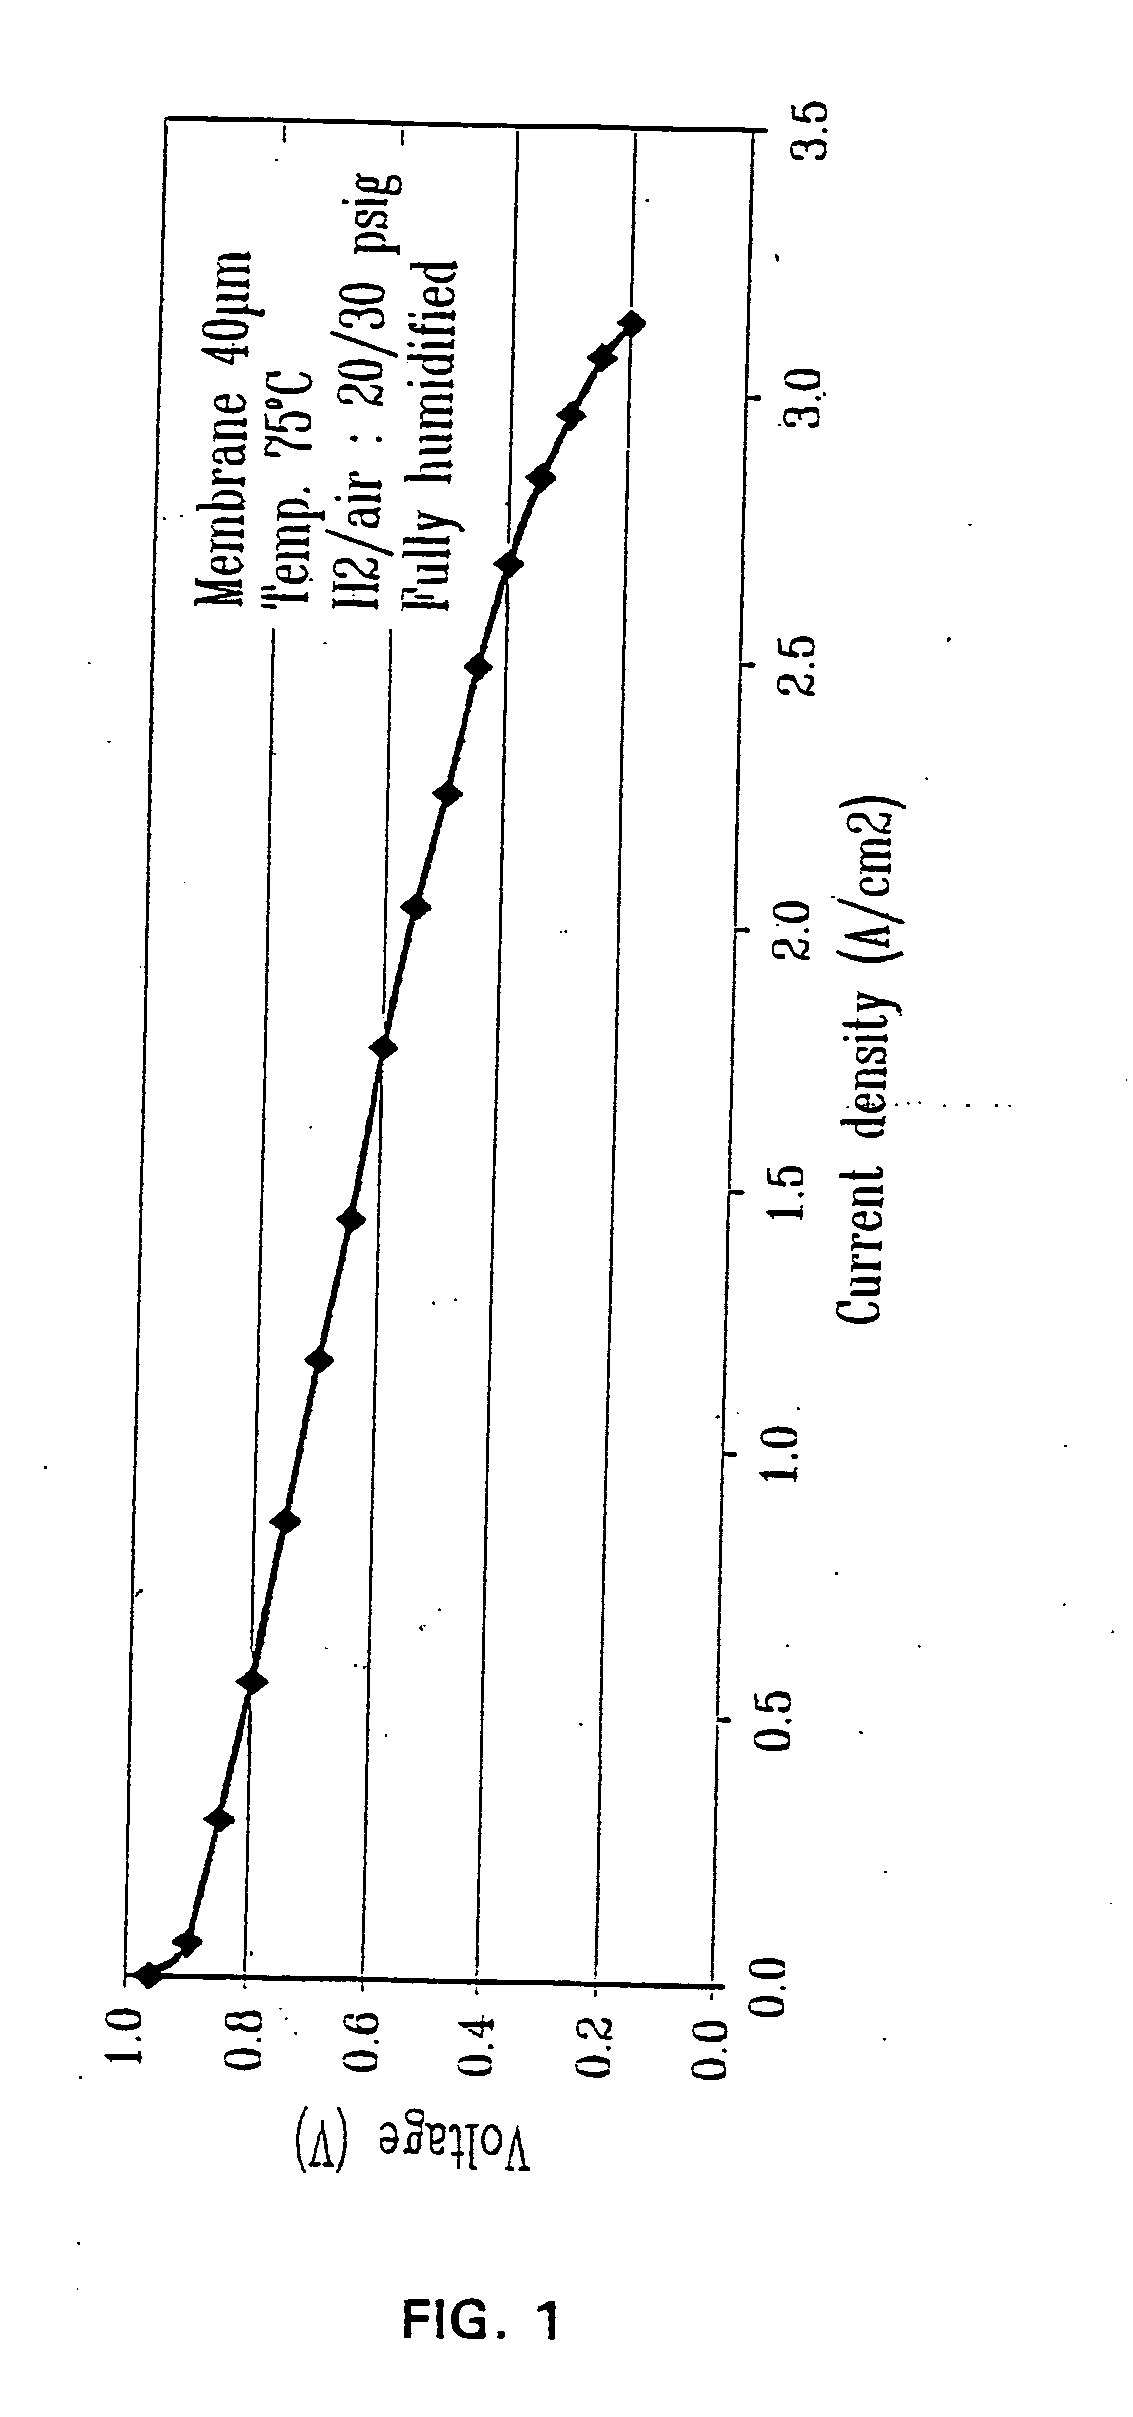 Ion exchange composite material based on proton conductive functionalized inorganic support compounds in a polymer matrix